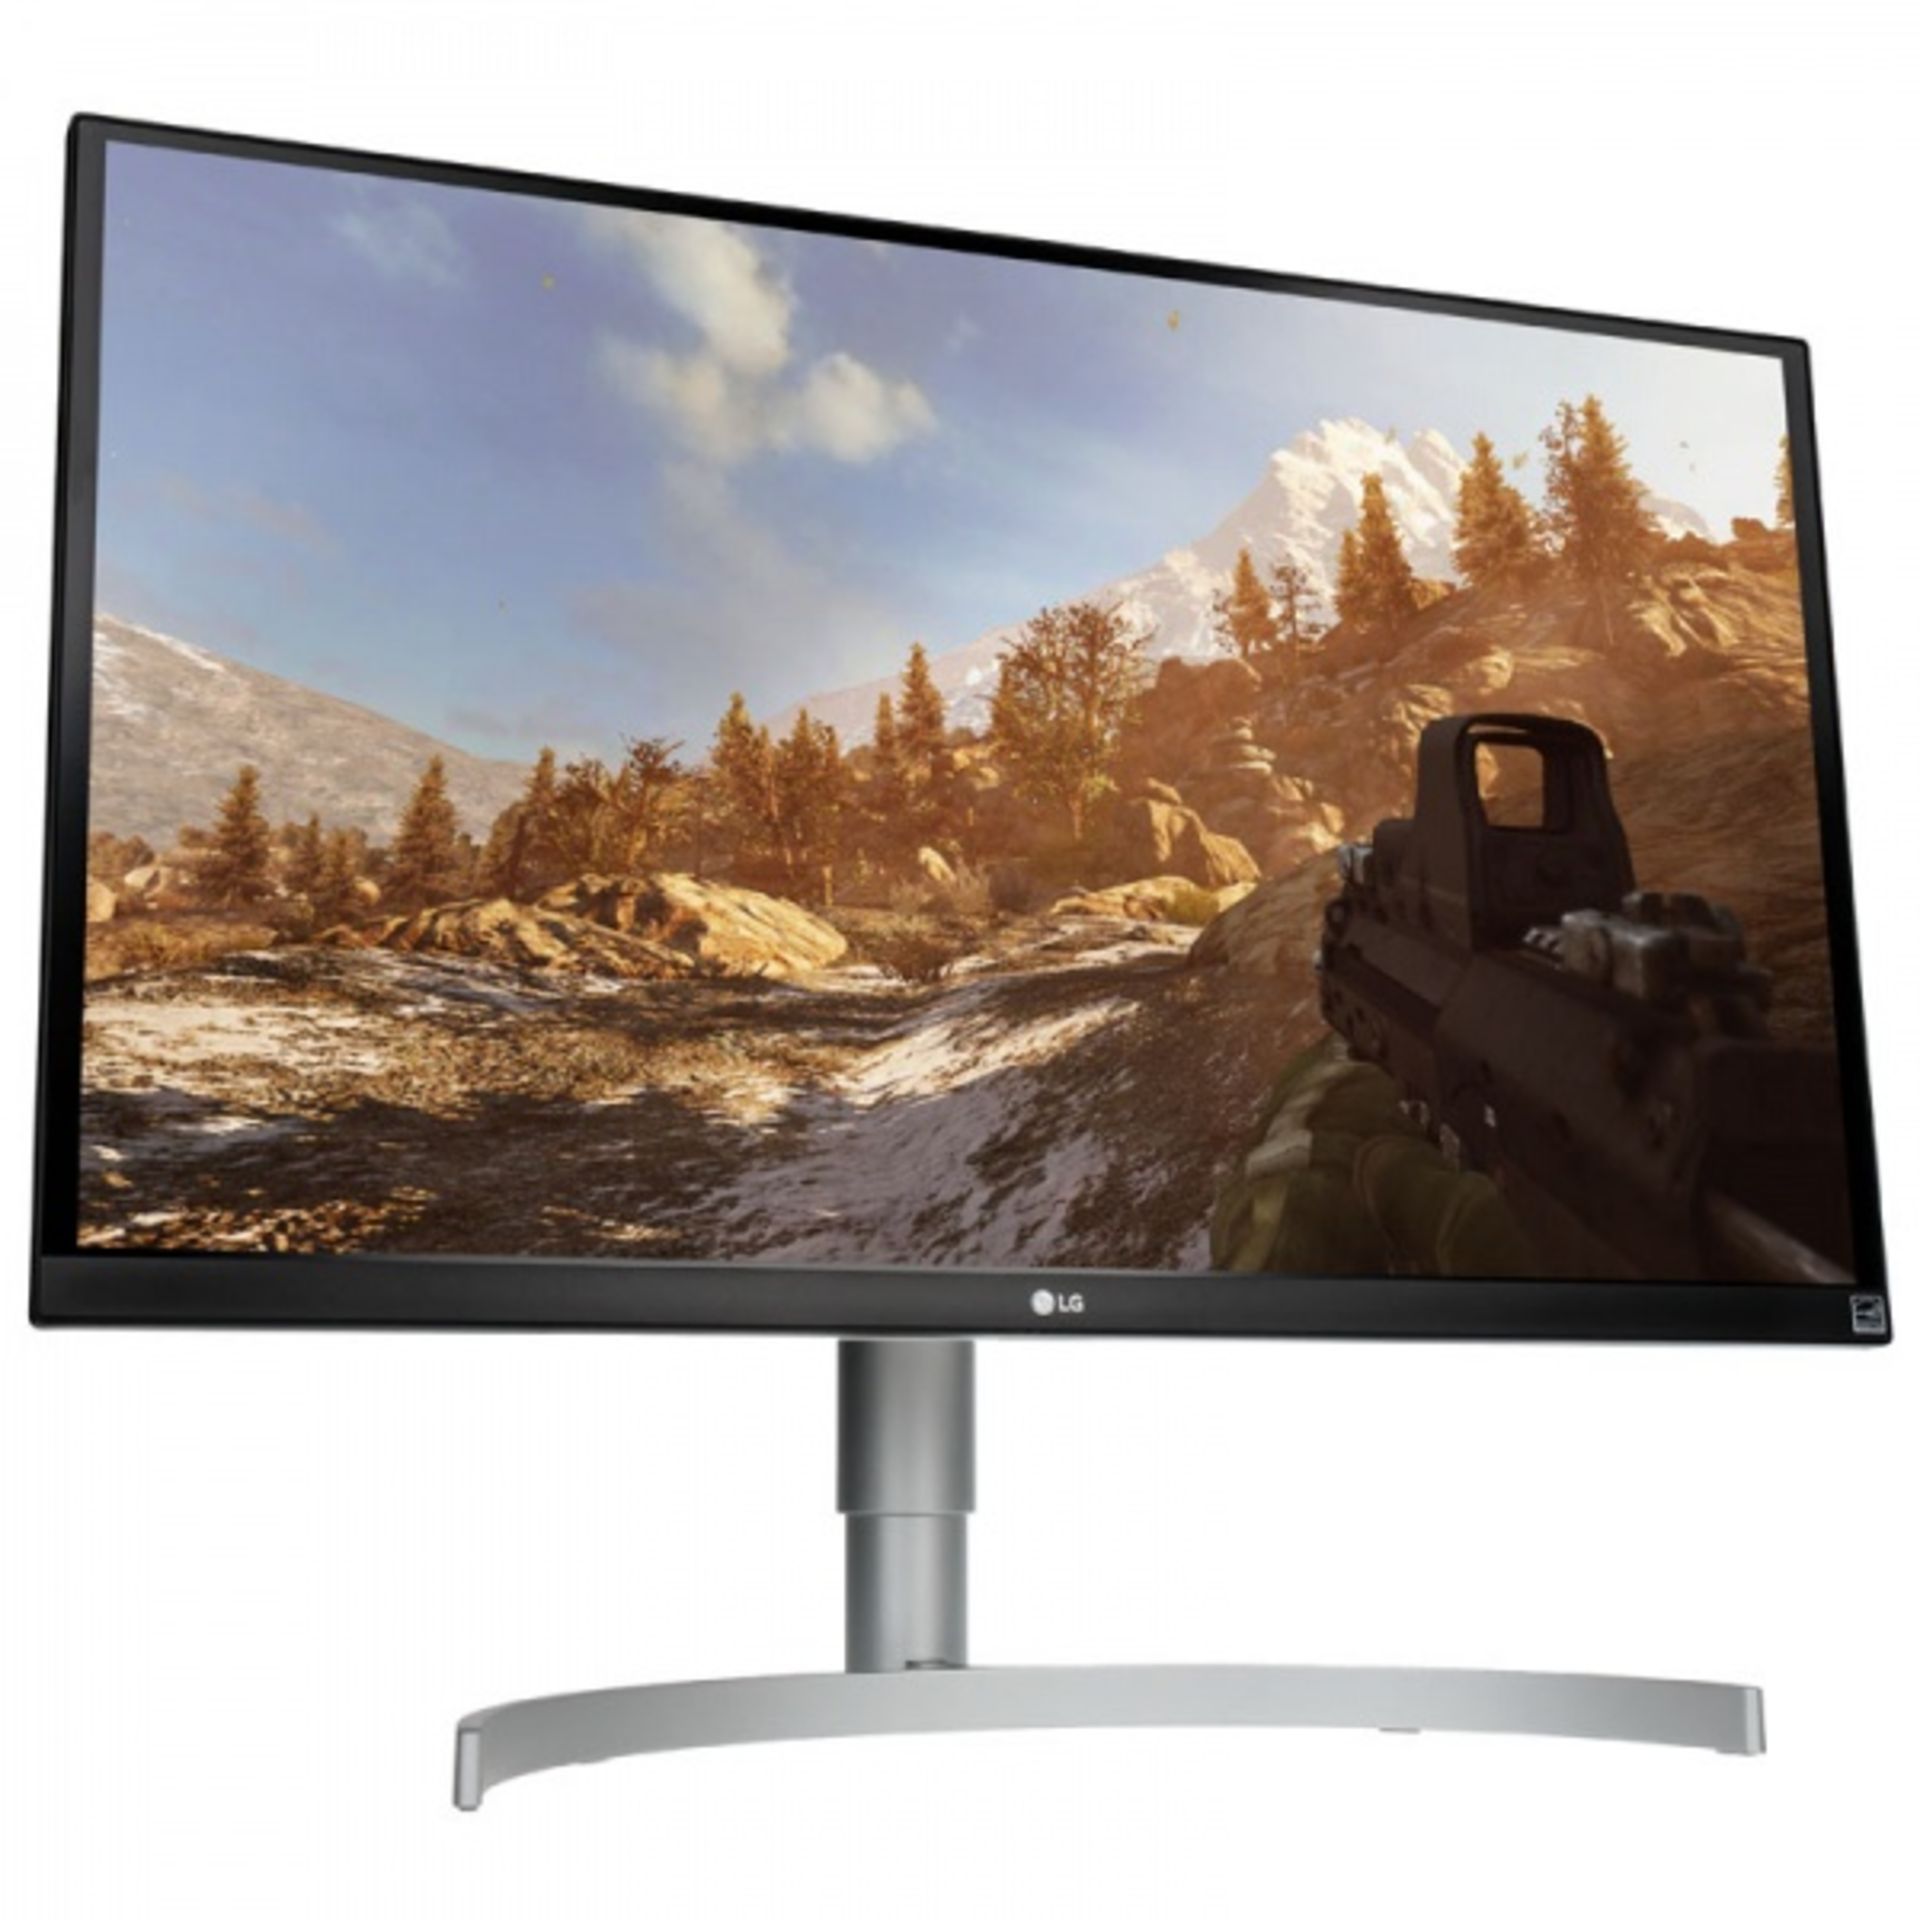 V Grade A LG 27 inch 4K UHD IPS LED MONITOR WITH HDR 10 - HDMI X 2, DISPLAY PORT X 1, USB TYPE C,